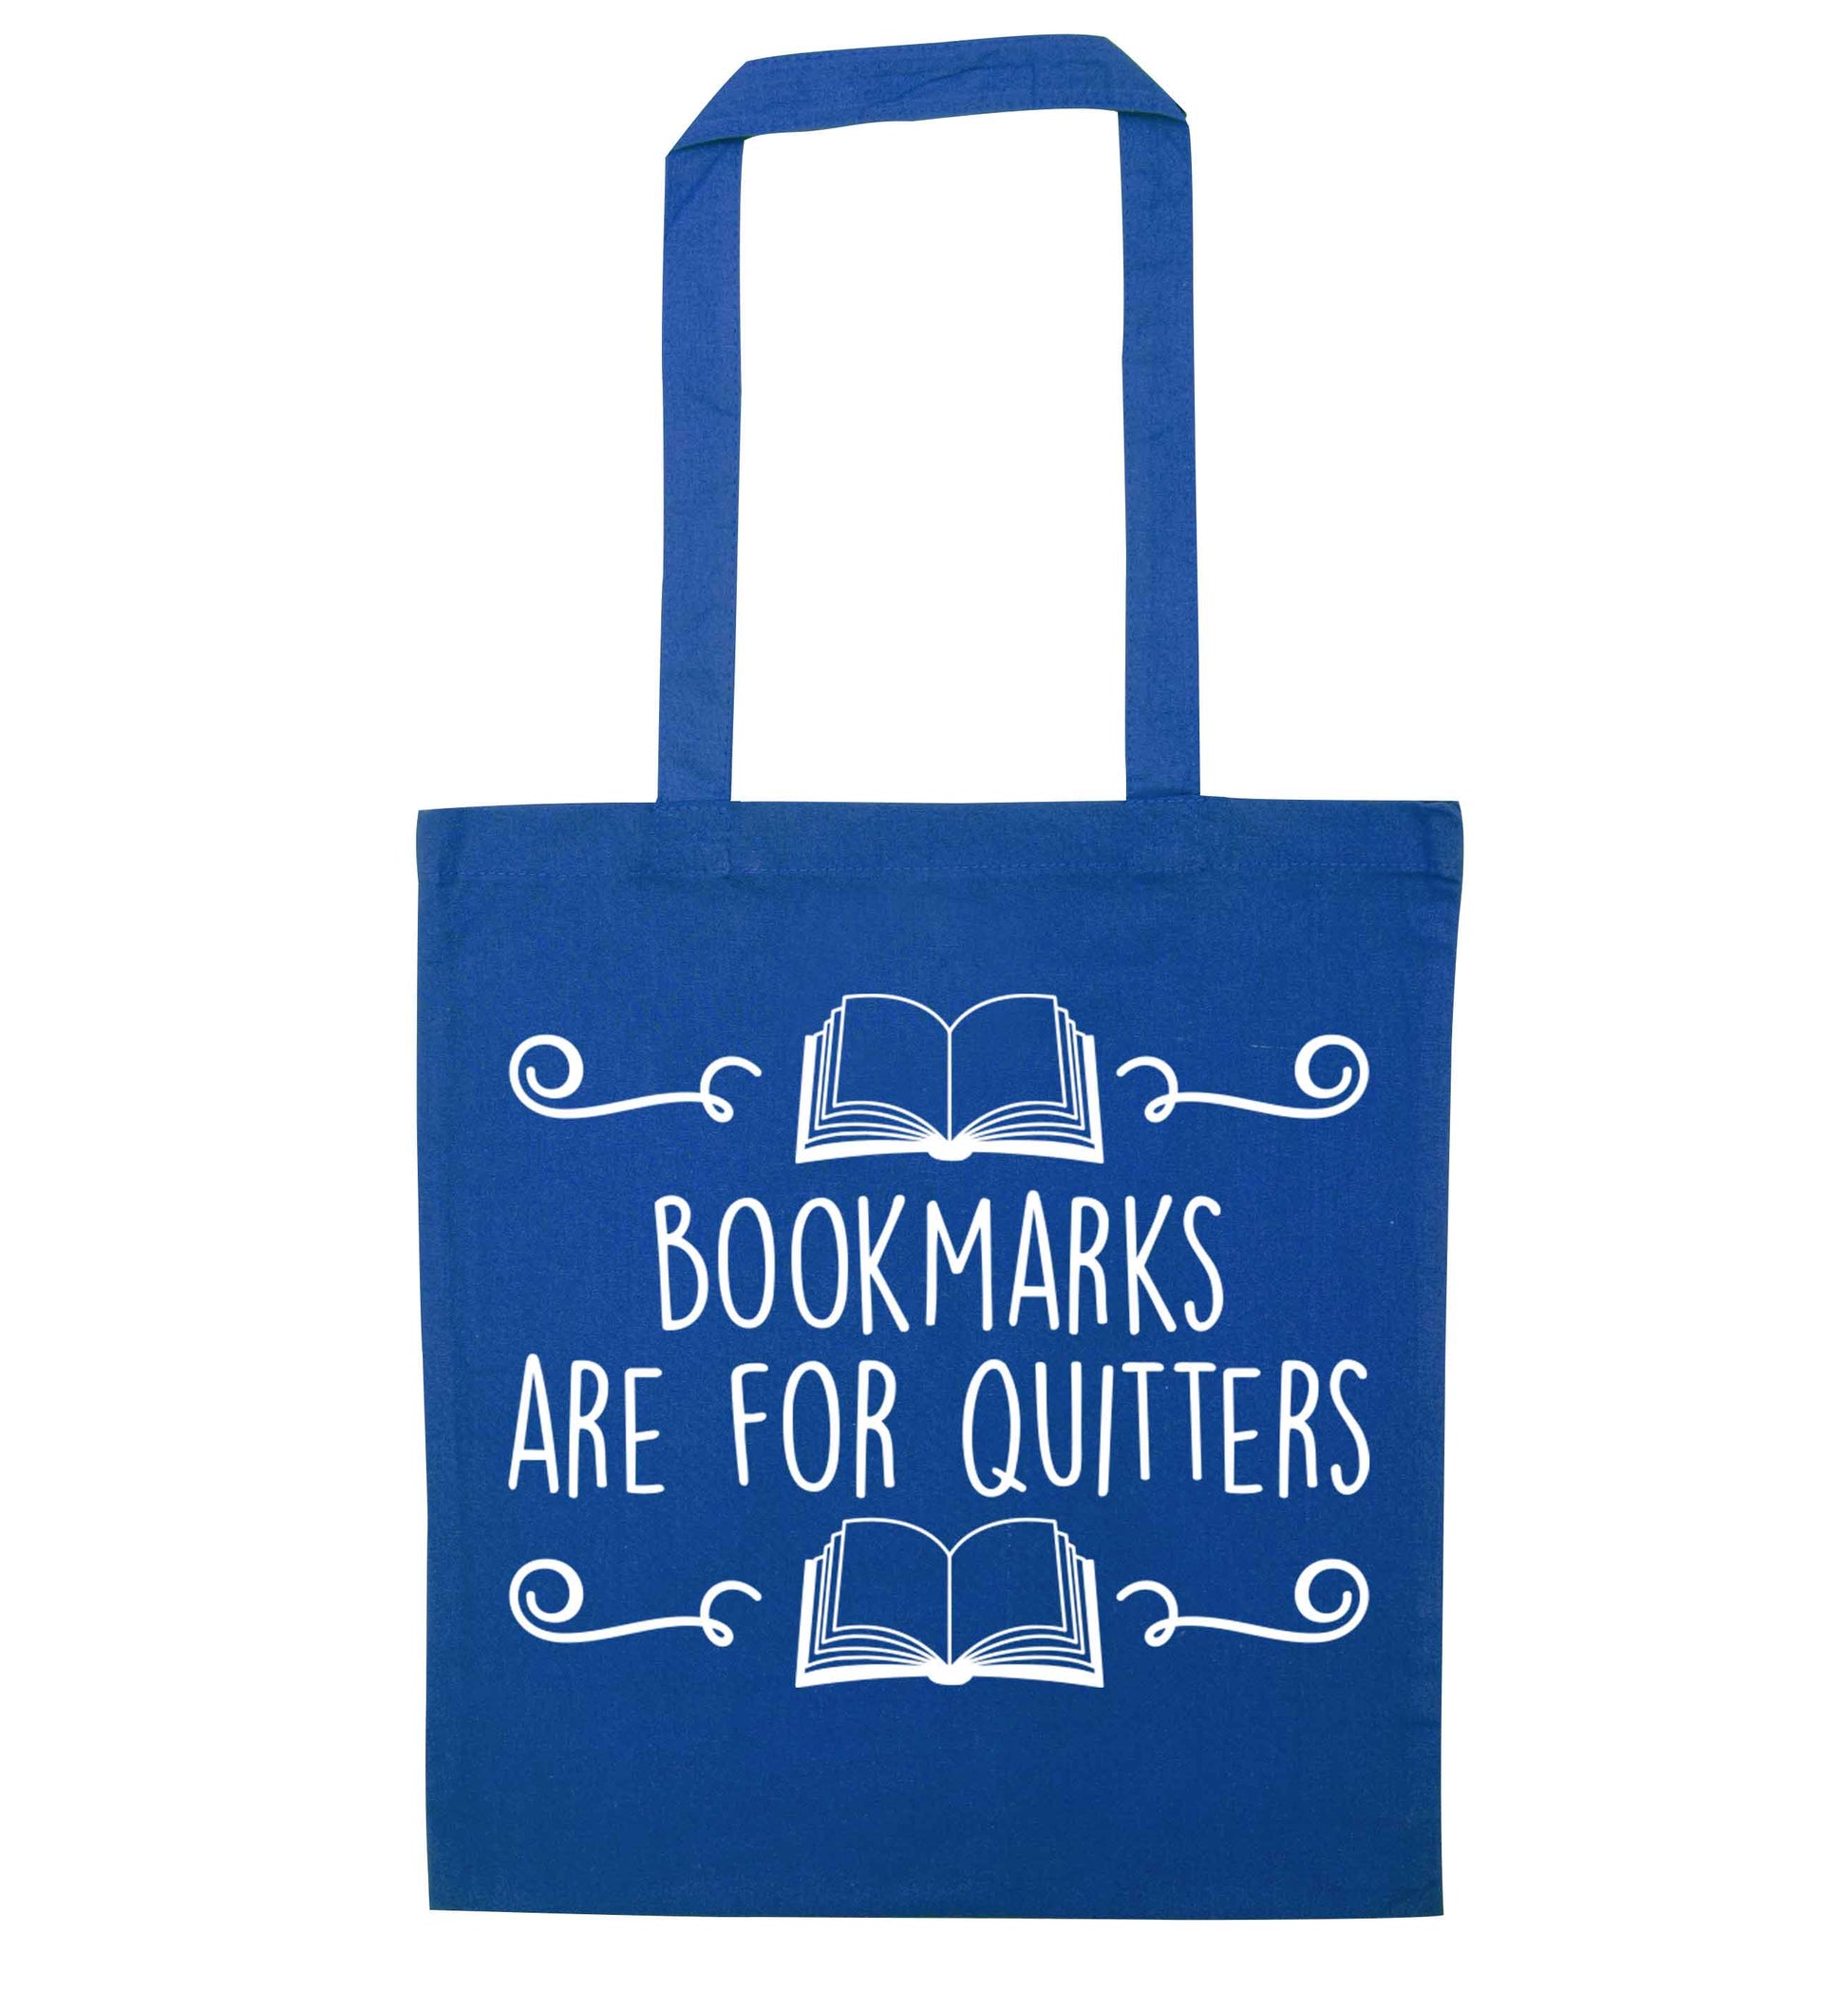 Bookmarks are for quitters blue tote bag